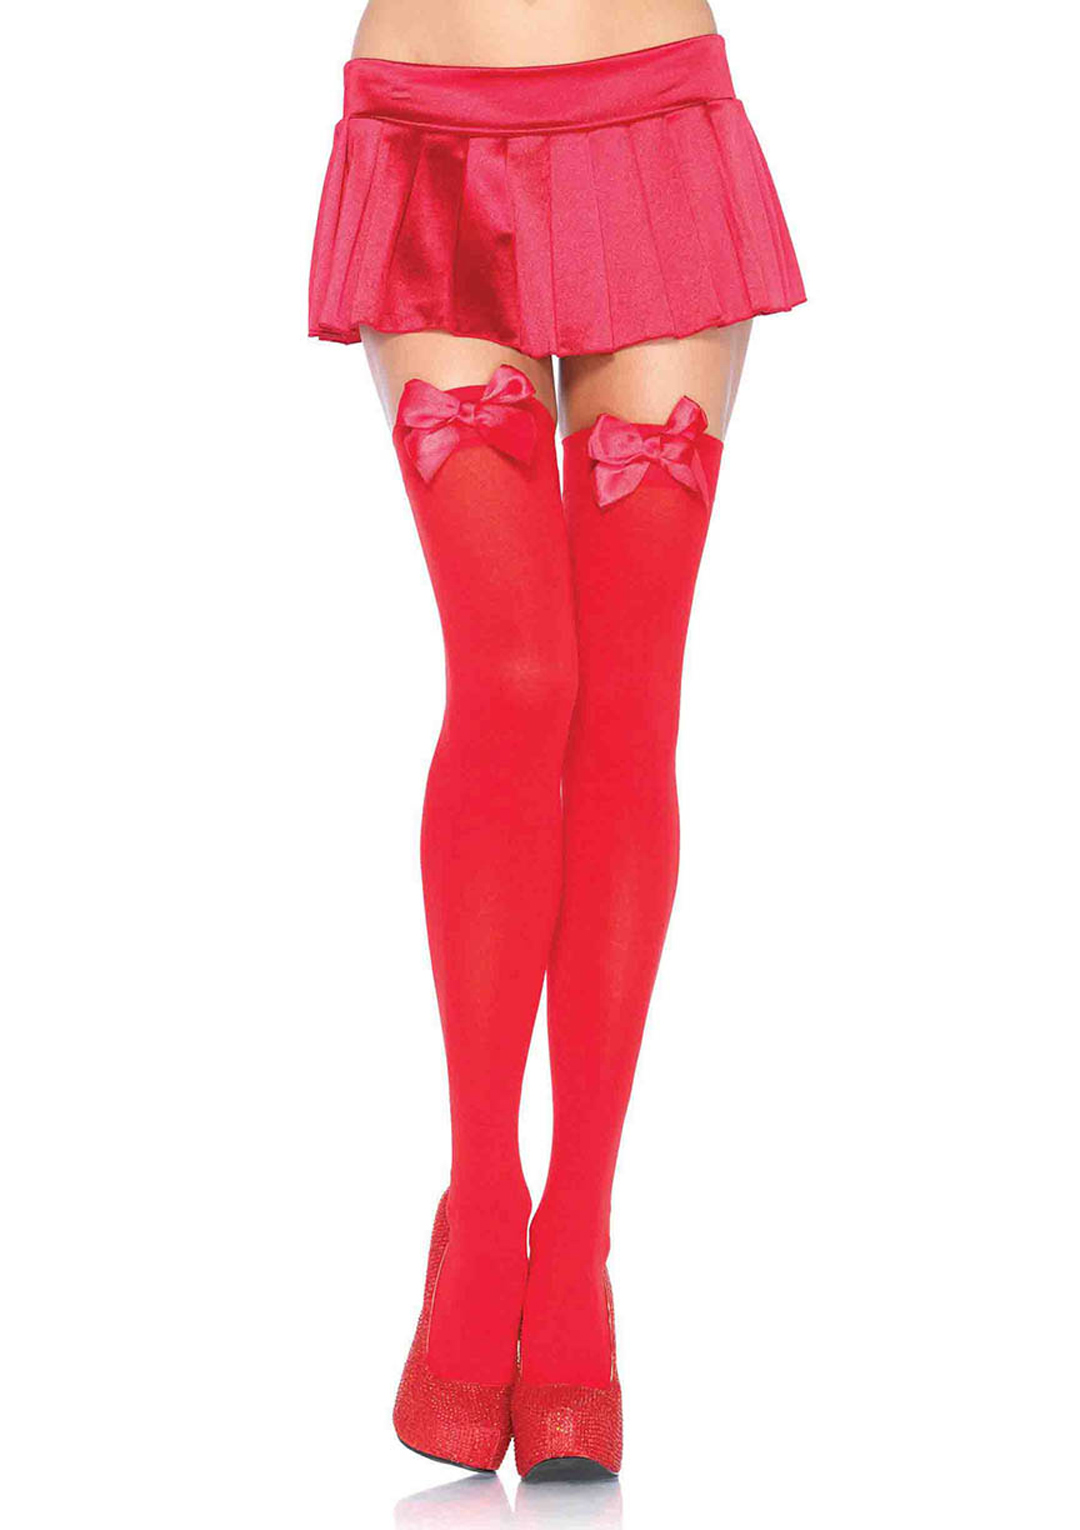 Leg Avenue Womens Satin Bow Accent Thigh Highs, Red, One Size - image 1 of 2